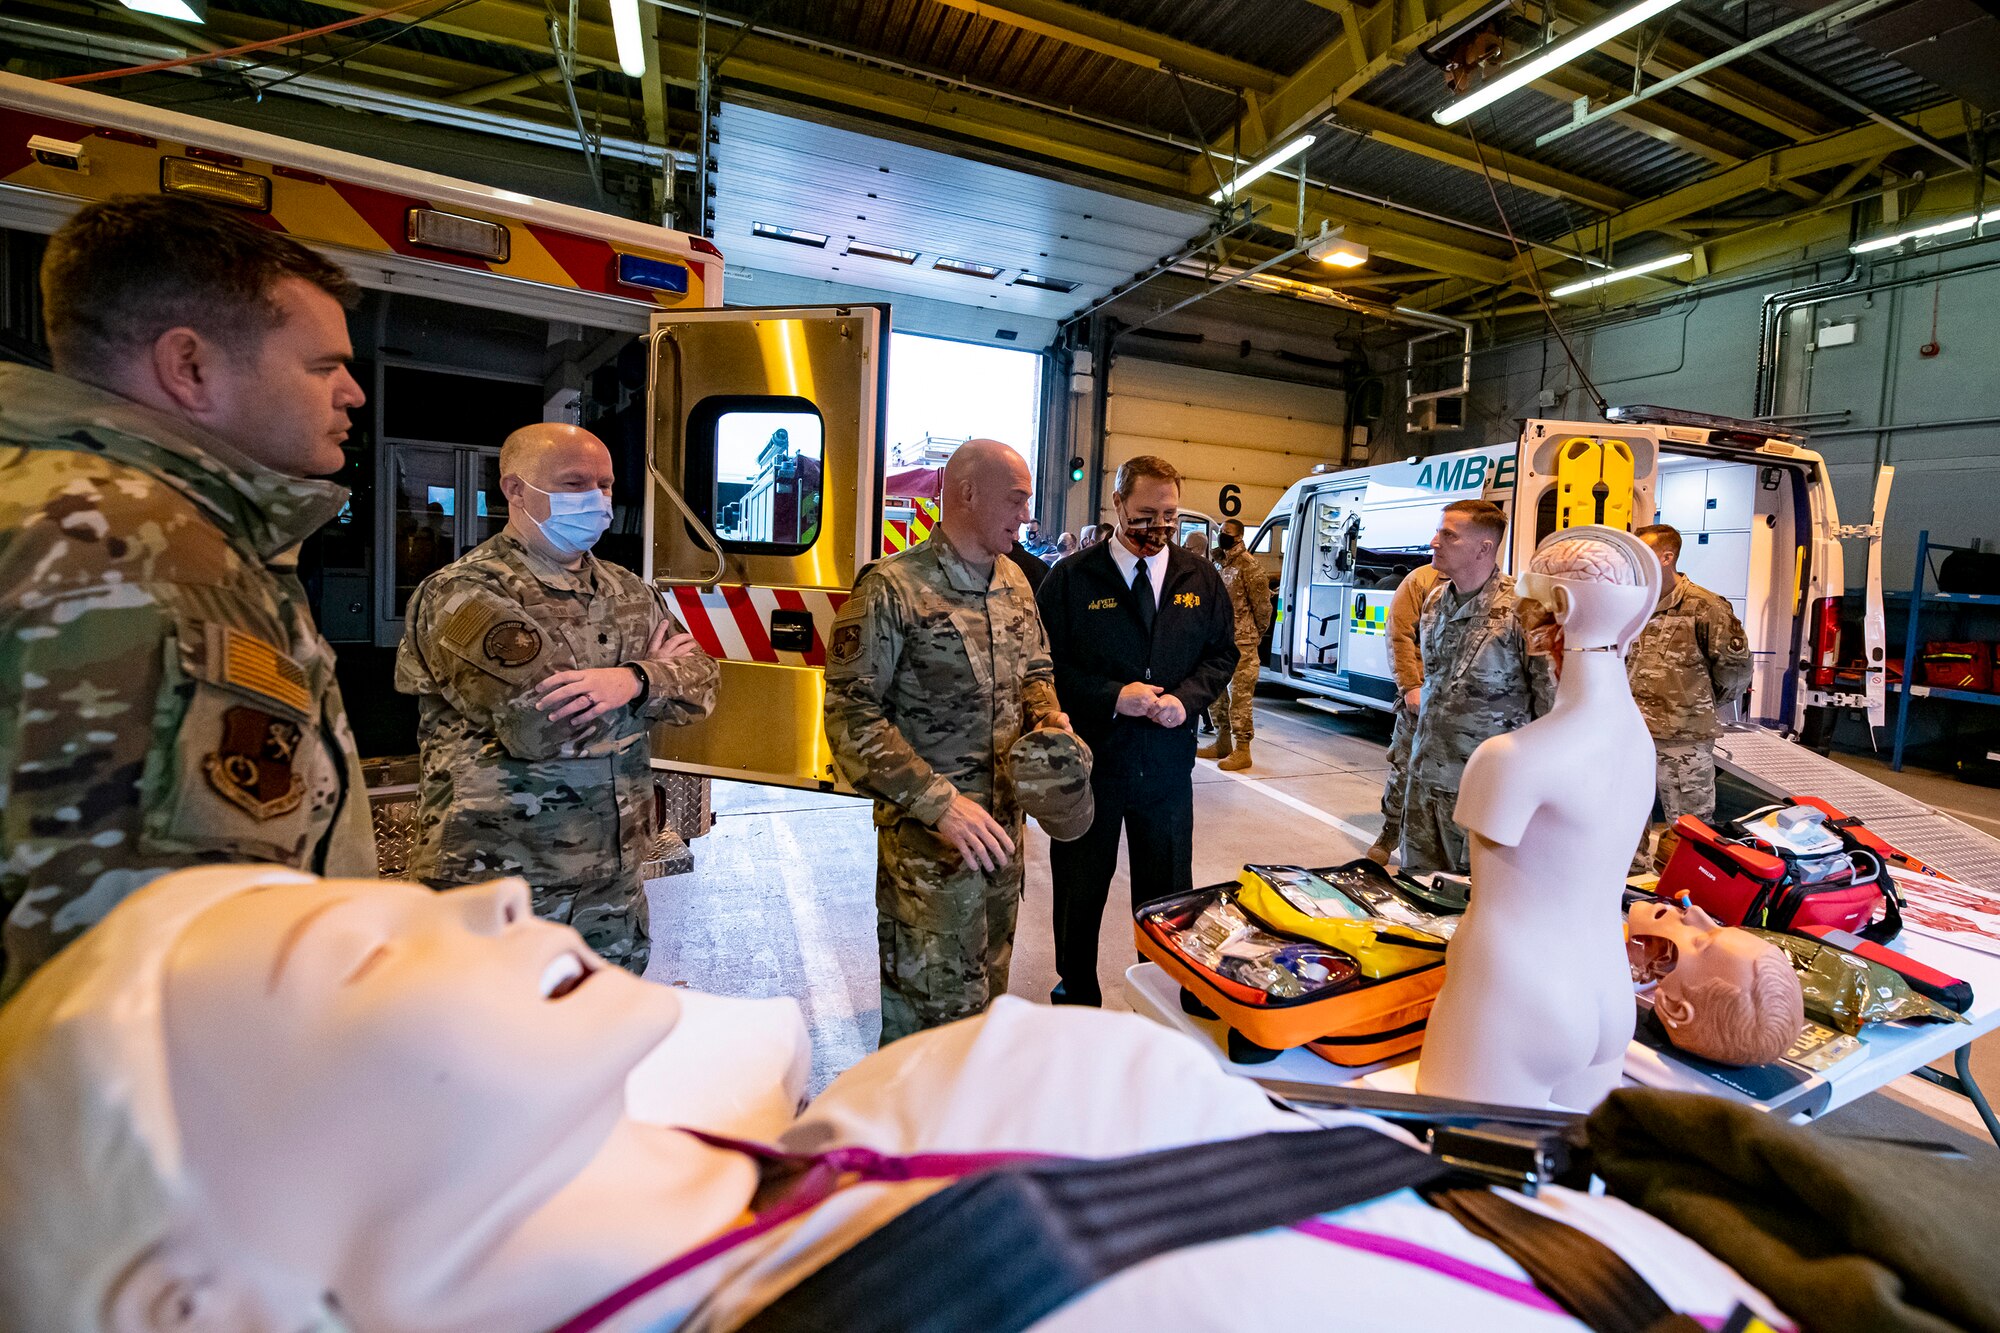 U.S. Air Force Brig. Gen. George T. Dietrich III, center left, U.S. Air Forces in Europe - Air Forces Africa director of logistics, engineering and force protection, looks at a medical display at RAF Molesworth, England, Nov. 5, 2021. Dietrich visited with Airmen from five geographically separated units across the wing and learned more about the unique mission of the 501st CSW. (U.S. Air Force photo by Senior Airman Eugene Oliver)